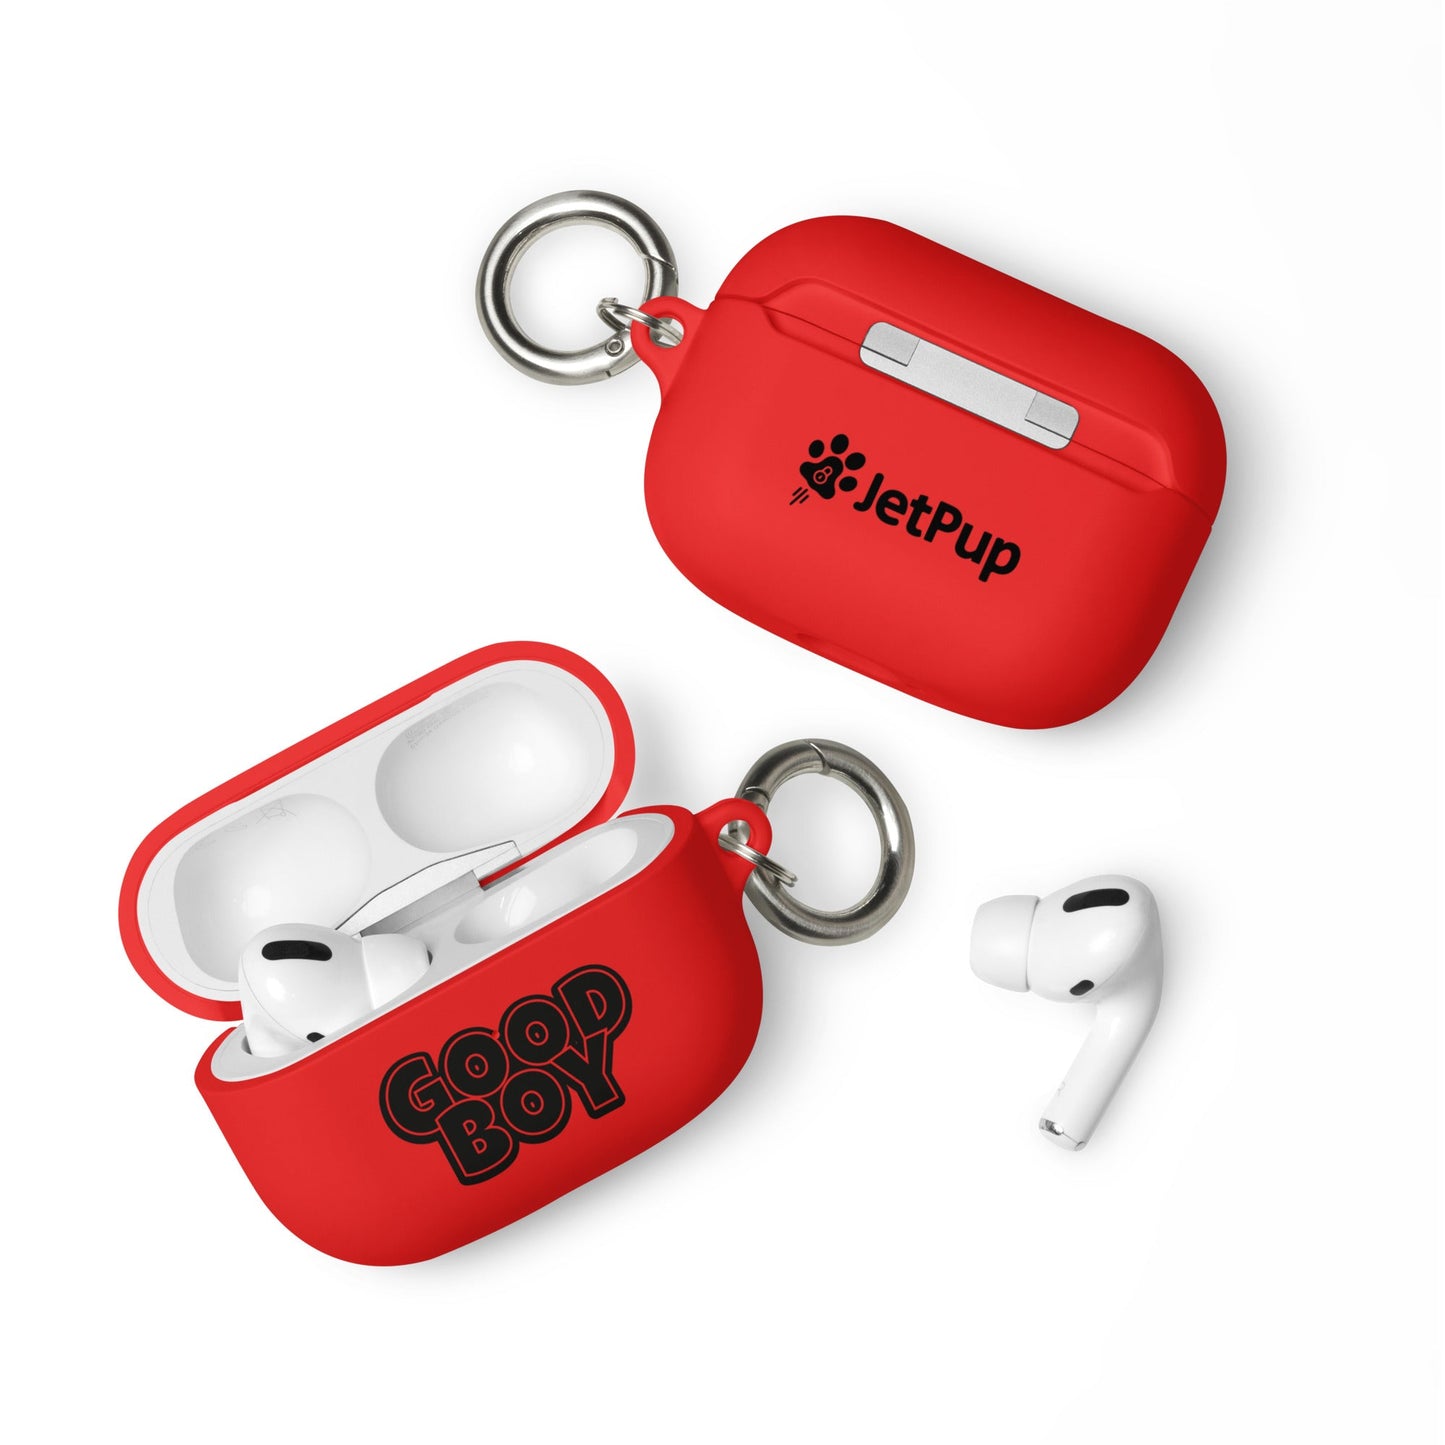 Good Boy AirPods Case - Red - JetPup